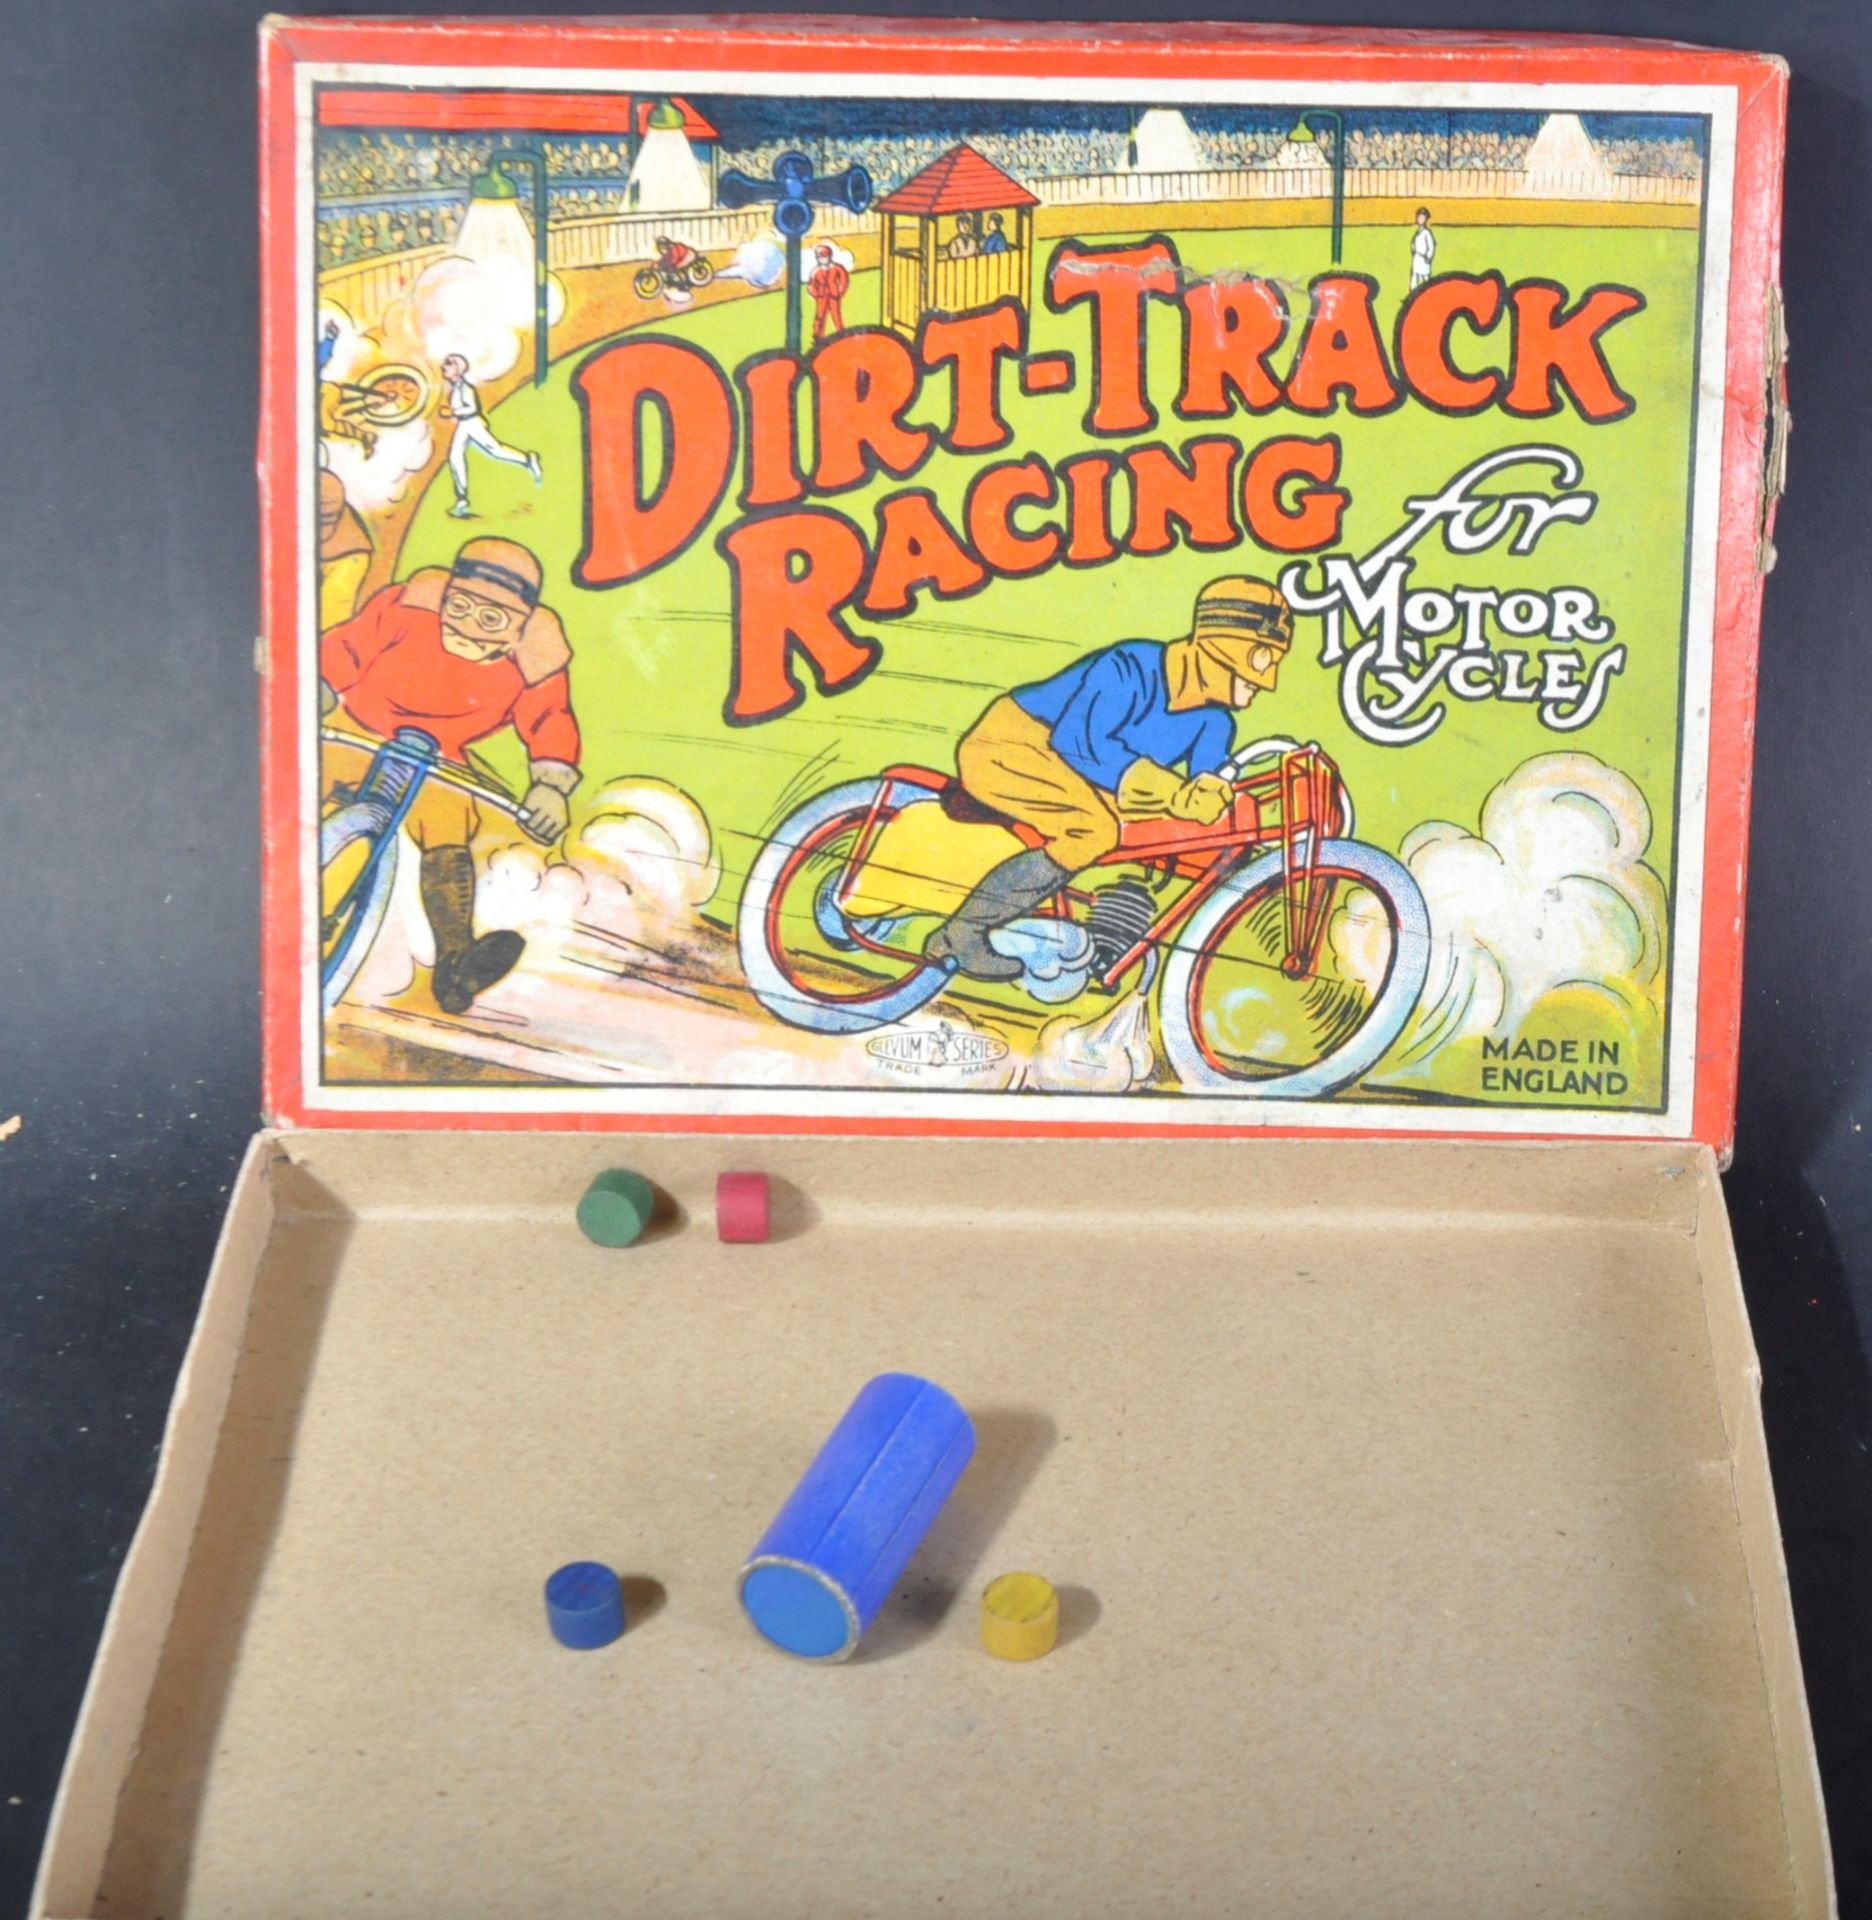 EARLY 20TH CENTURY GLEVUM GAMES DIRT TRACK RACING GAME - Image 2 of 3